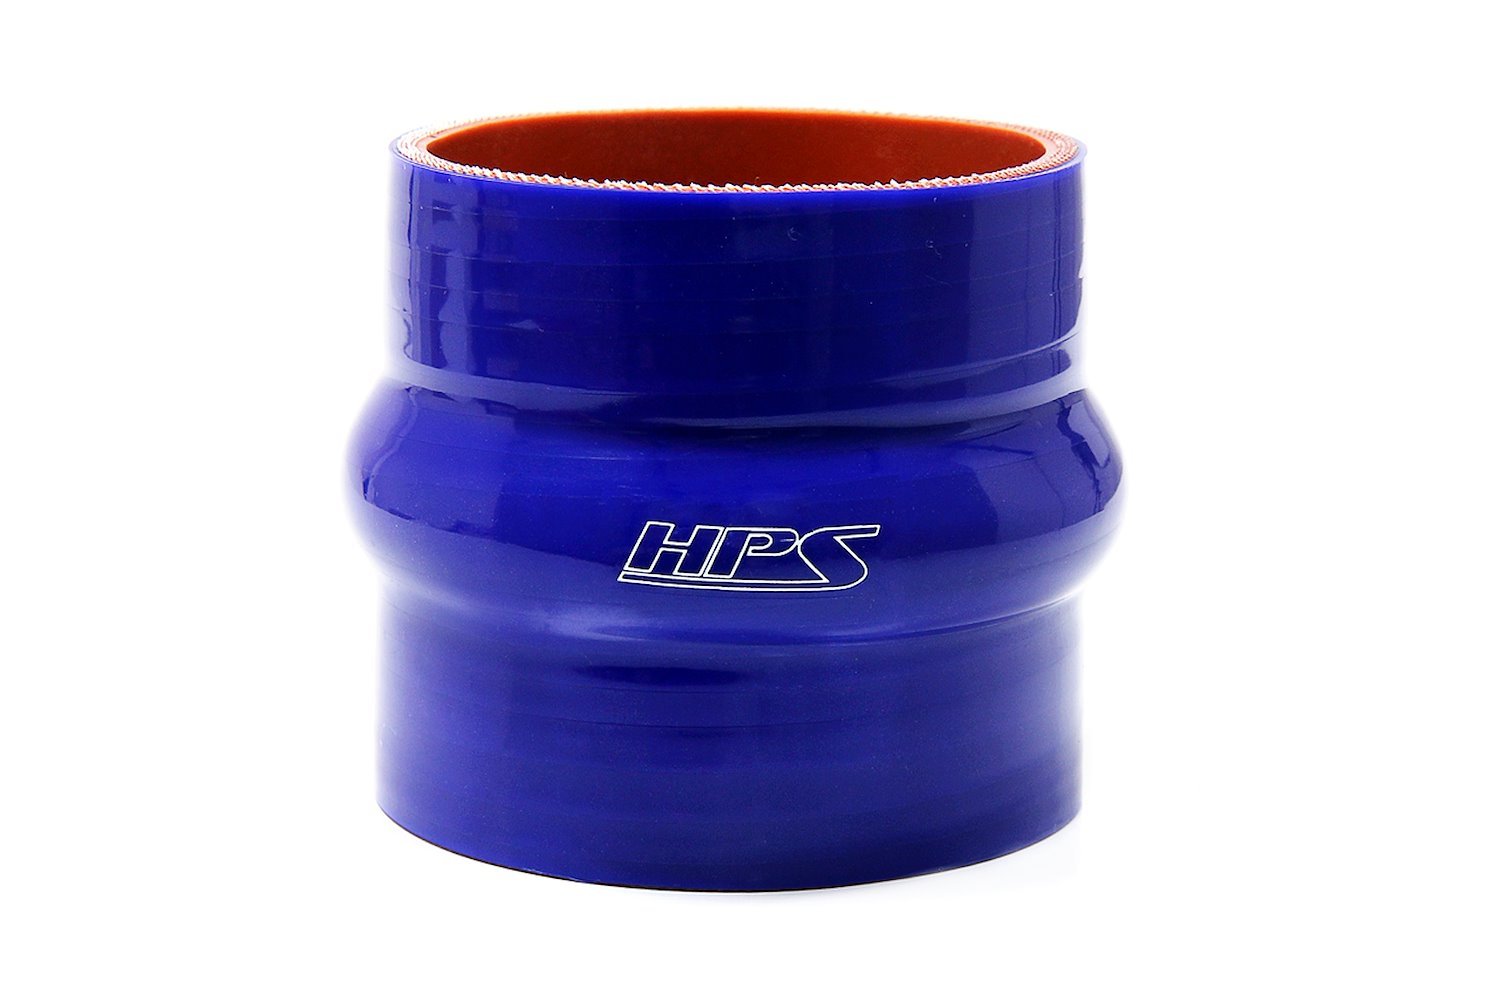 HTSHC-150-BLUE Silicone Hump Coupler Hose, High-Temp 4-Ply Reinforced, 1-1/2 in. ID, 3 in. Long, Blue